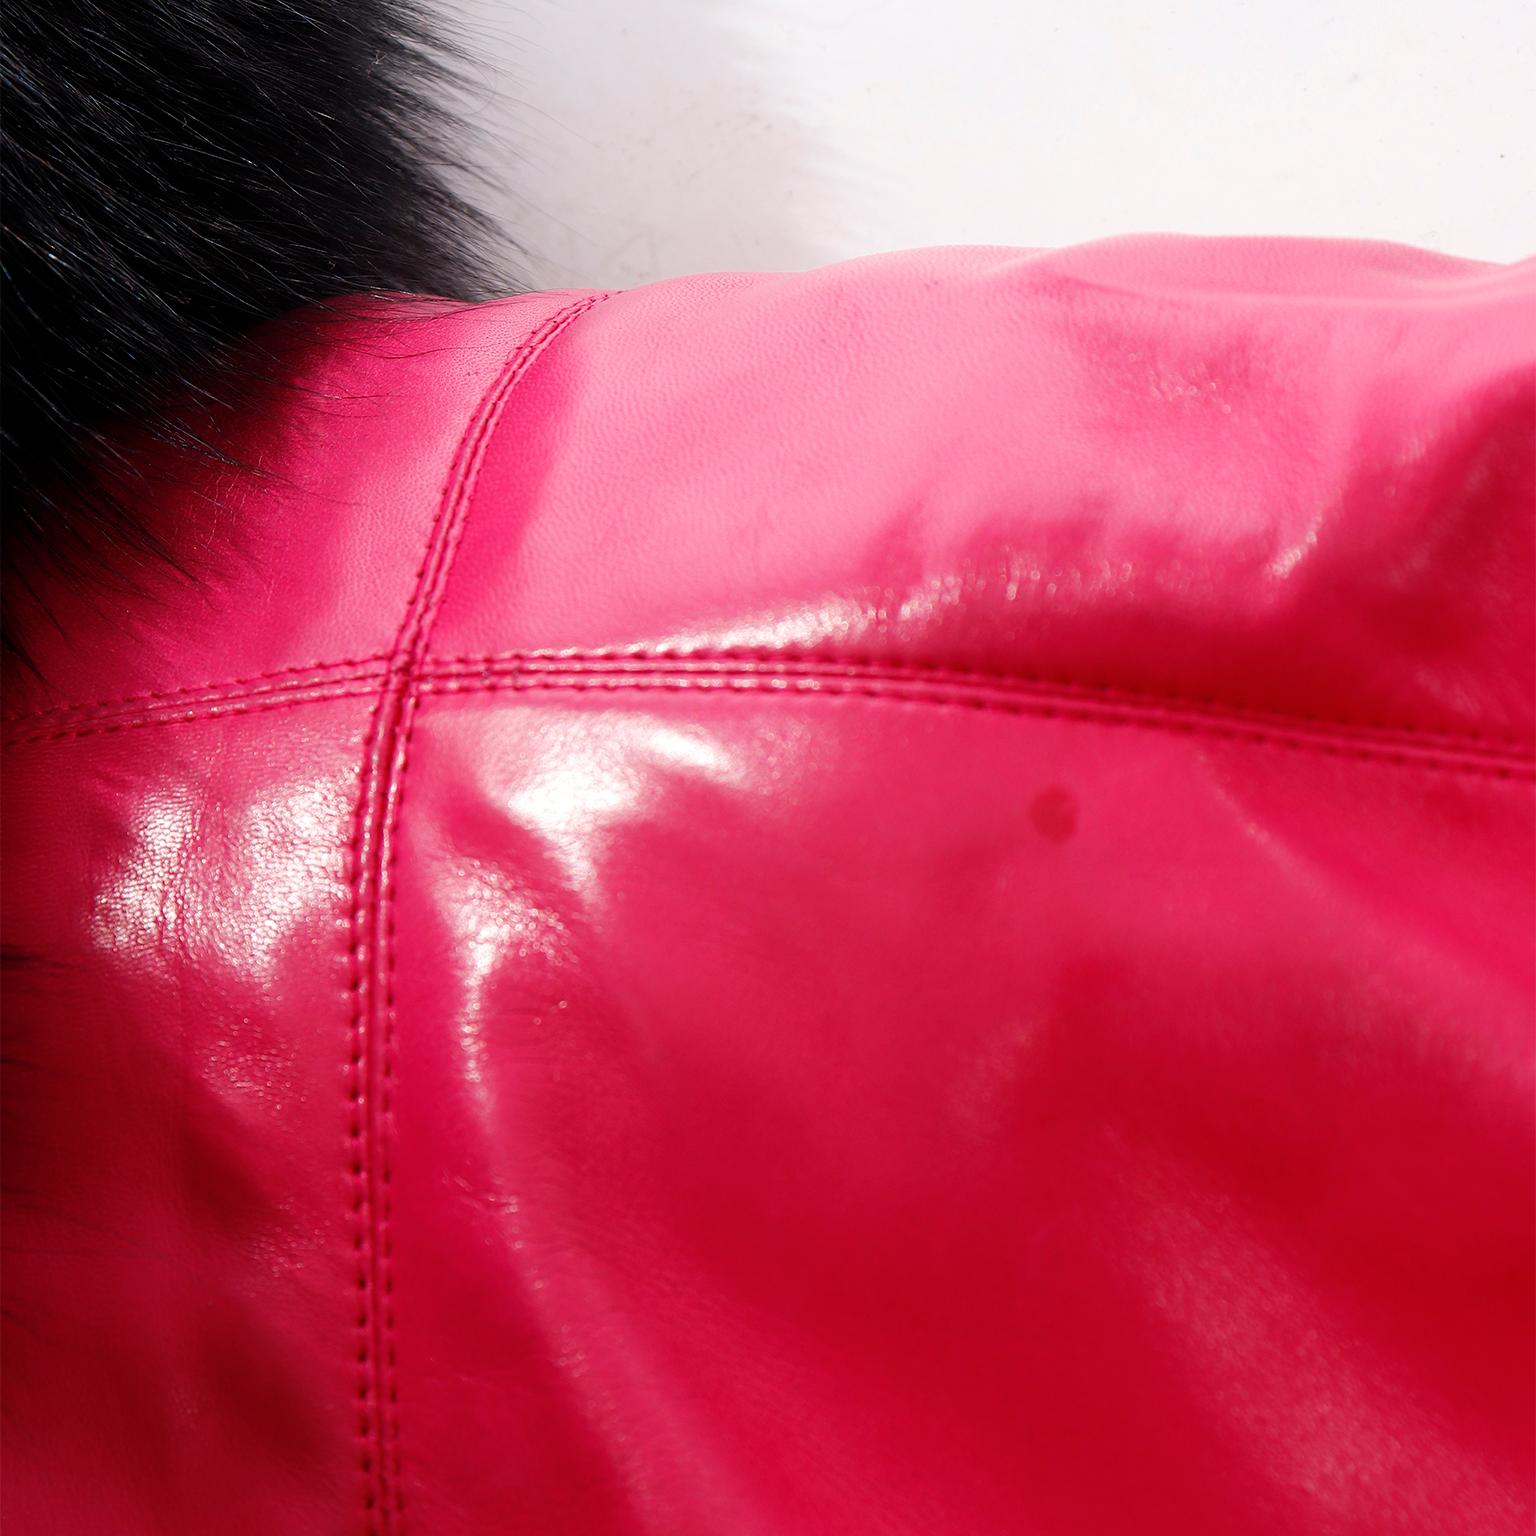 1987 Yves Saint Laurent Runway Haute Couture Pink Leather Jacket w Black Fur For Sale 6